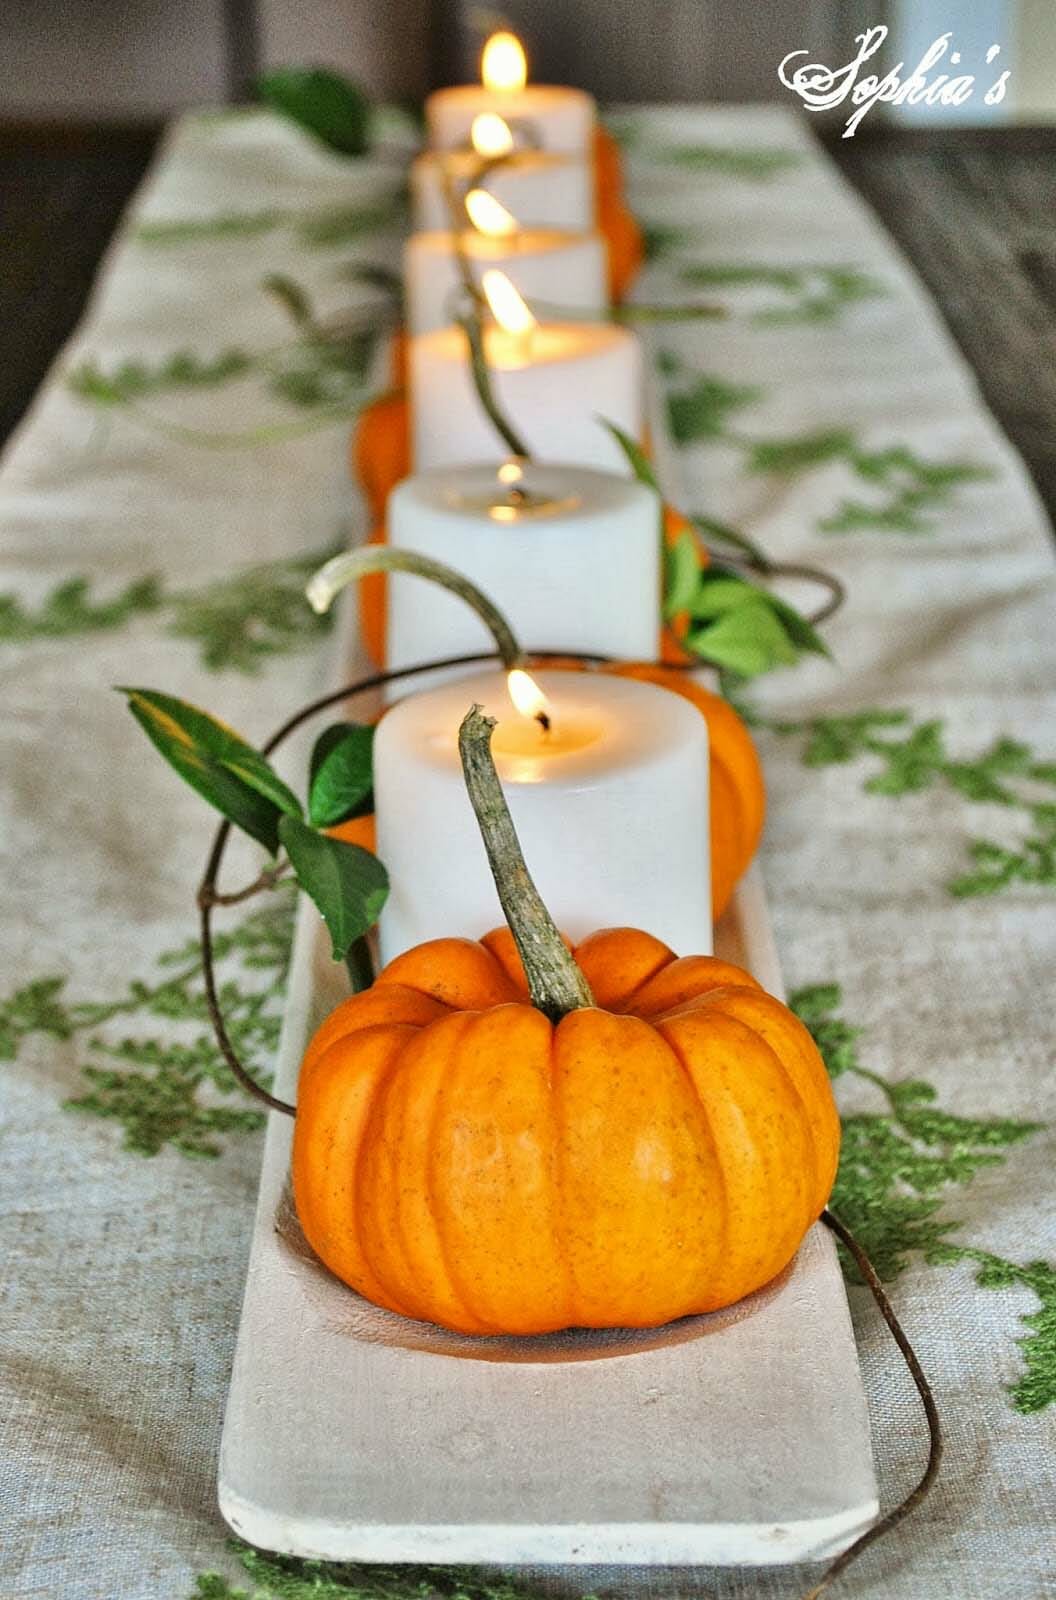 Welcoming fall table decorating ideas 20 1 kindesign.jpg